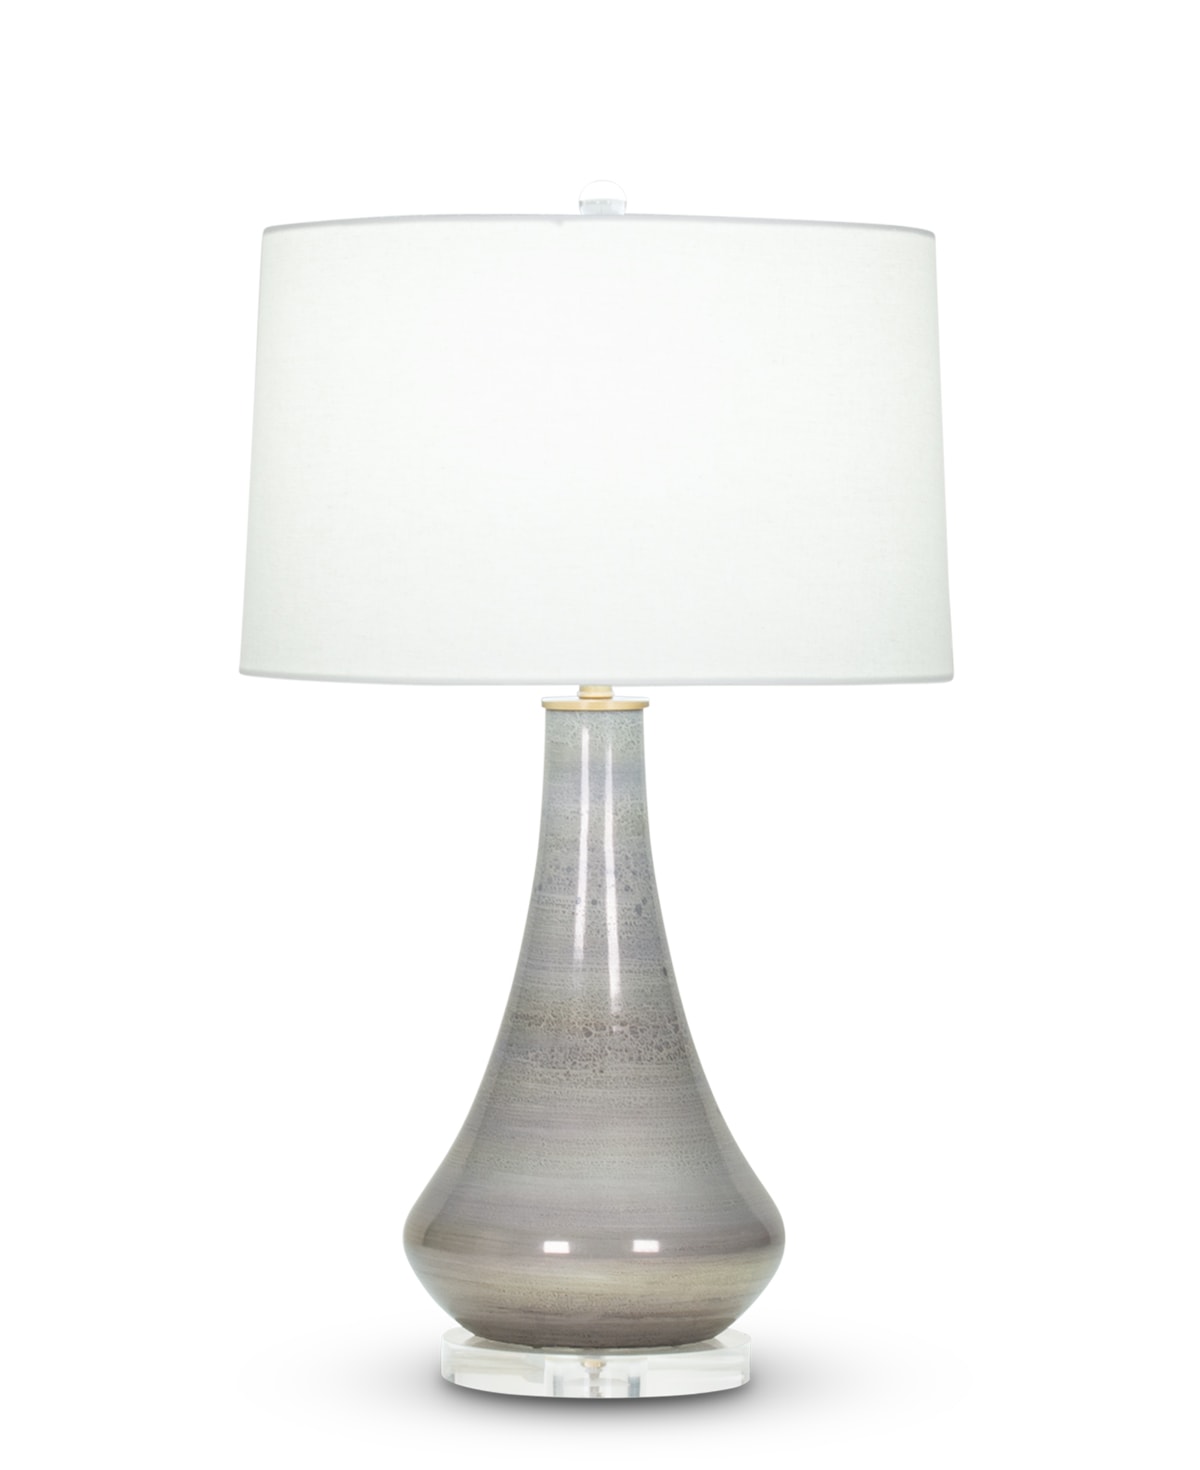 FlowDecor Orwell Table Lamp in mouth-blown glass with grey mixed finish and off-white linen tapered drum shade (# 4030)